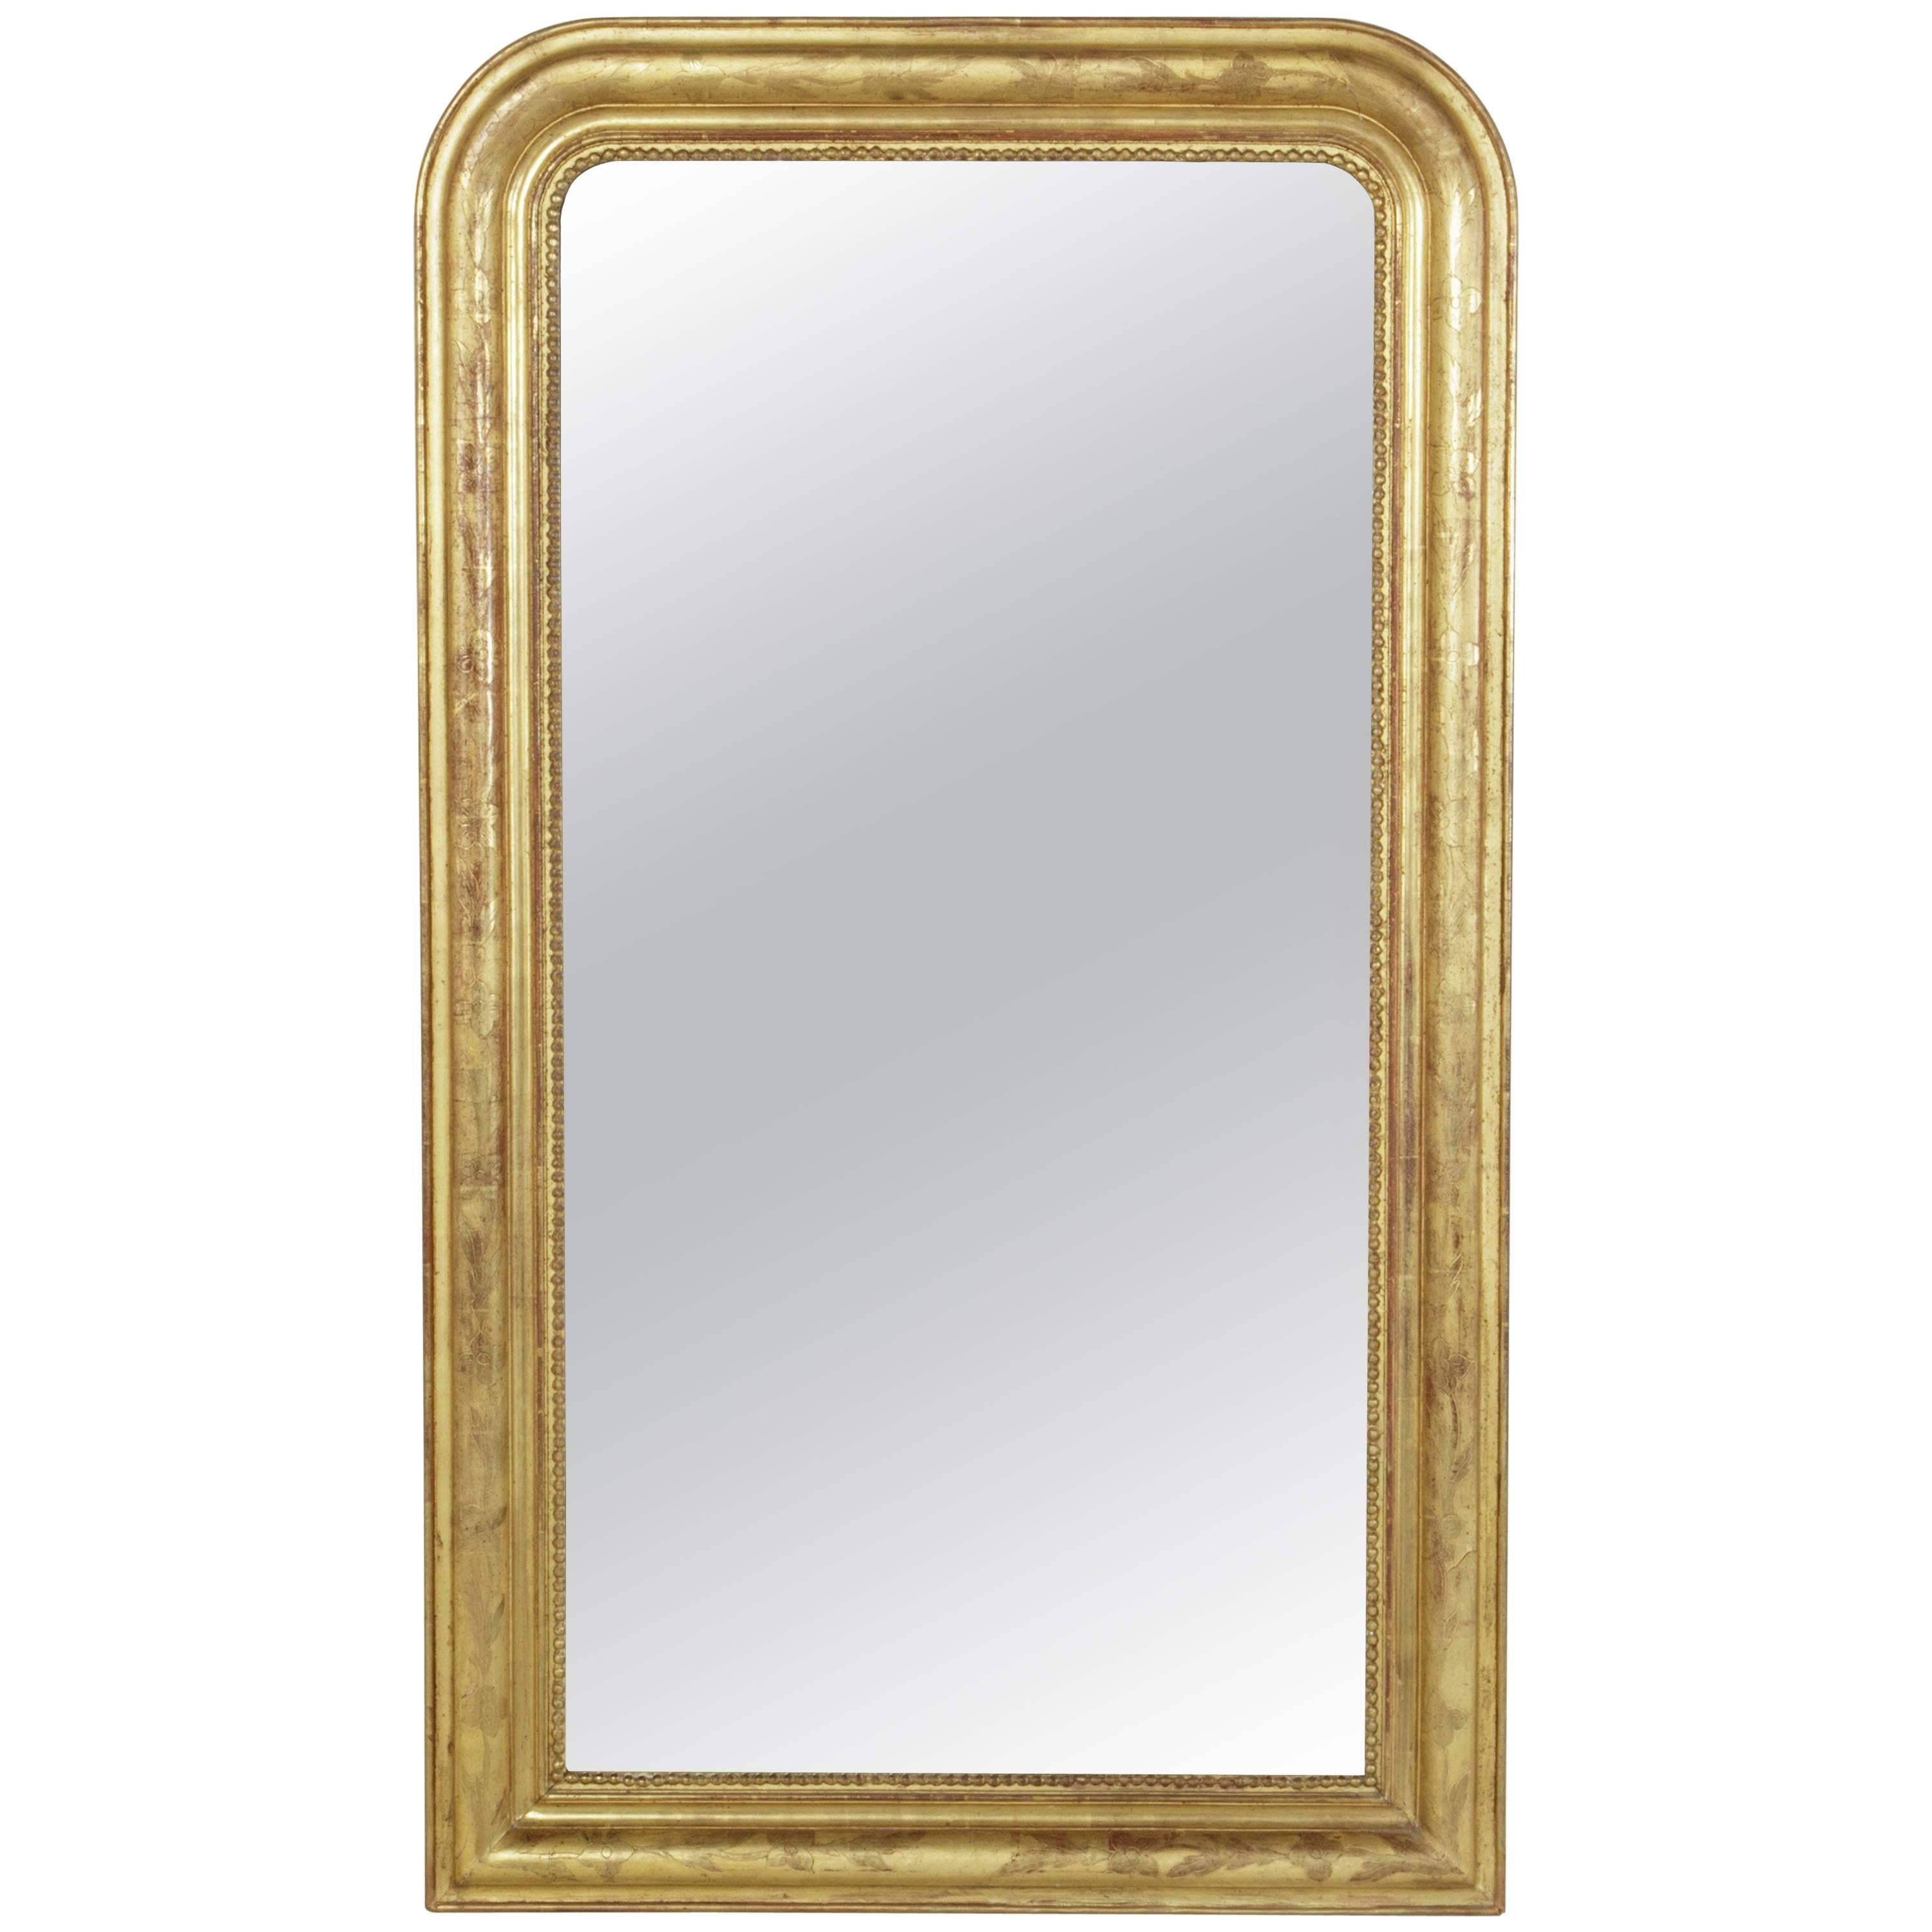 19th Century French Louis Philippe Period Giltwood Mirror with Incised Frame